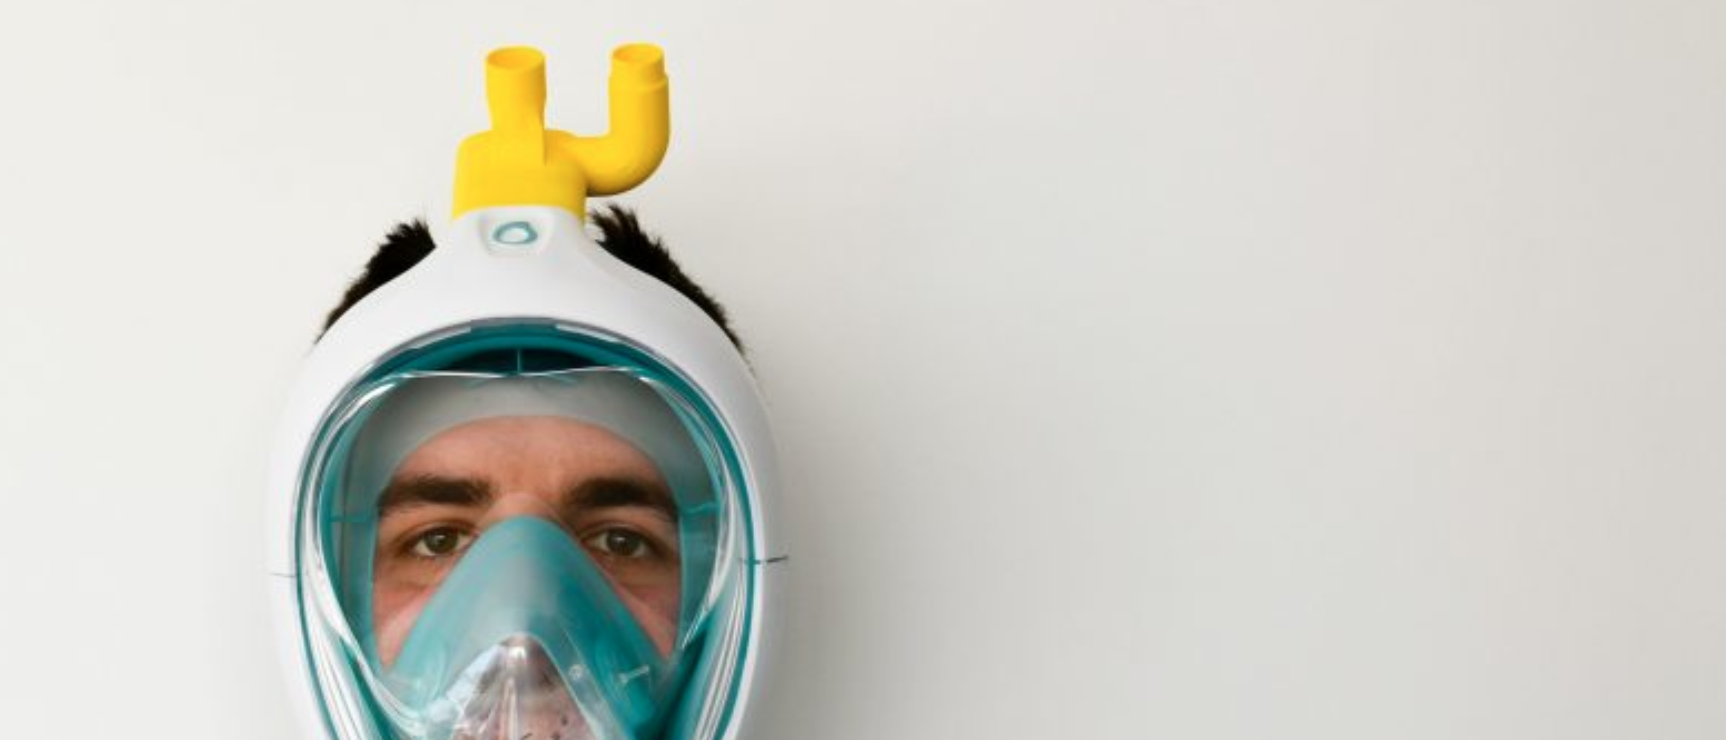 Picture of a Decathlon snorkelling mask with a valve that turns it into a respiratory mask